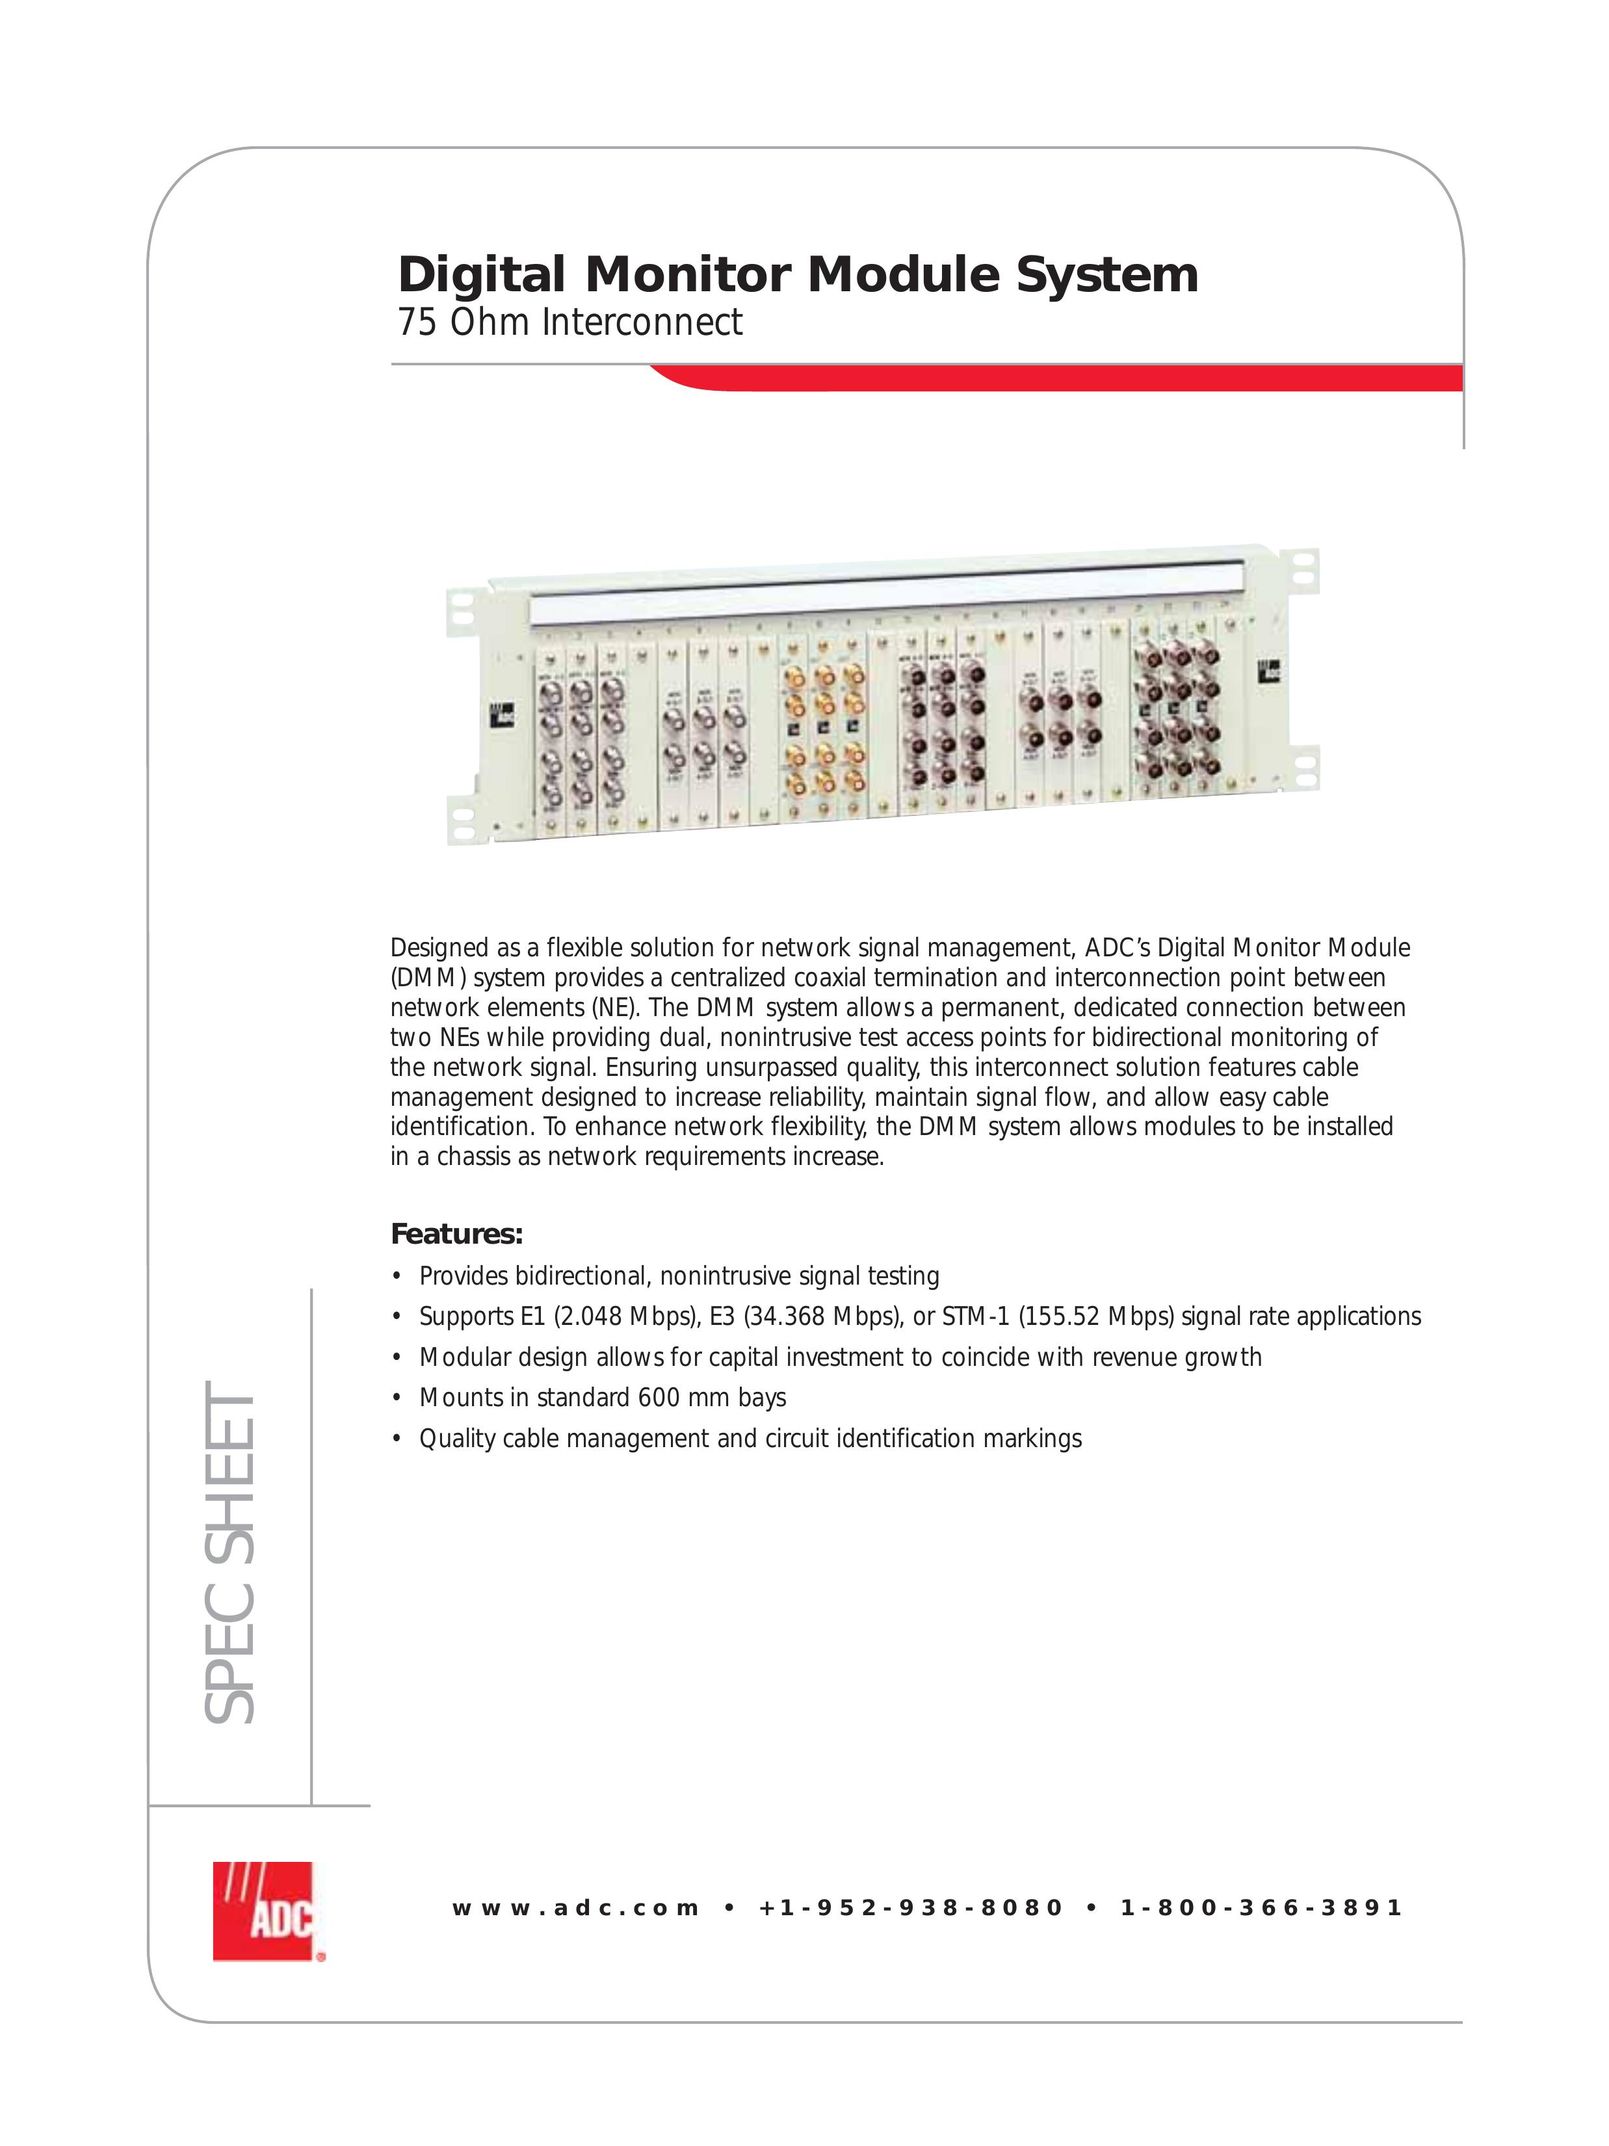 ADC 75 Ohm Interconnect Network Router User Manual